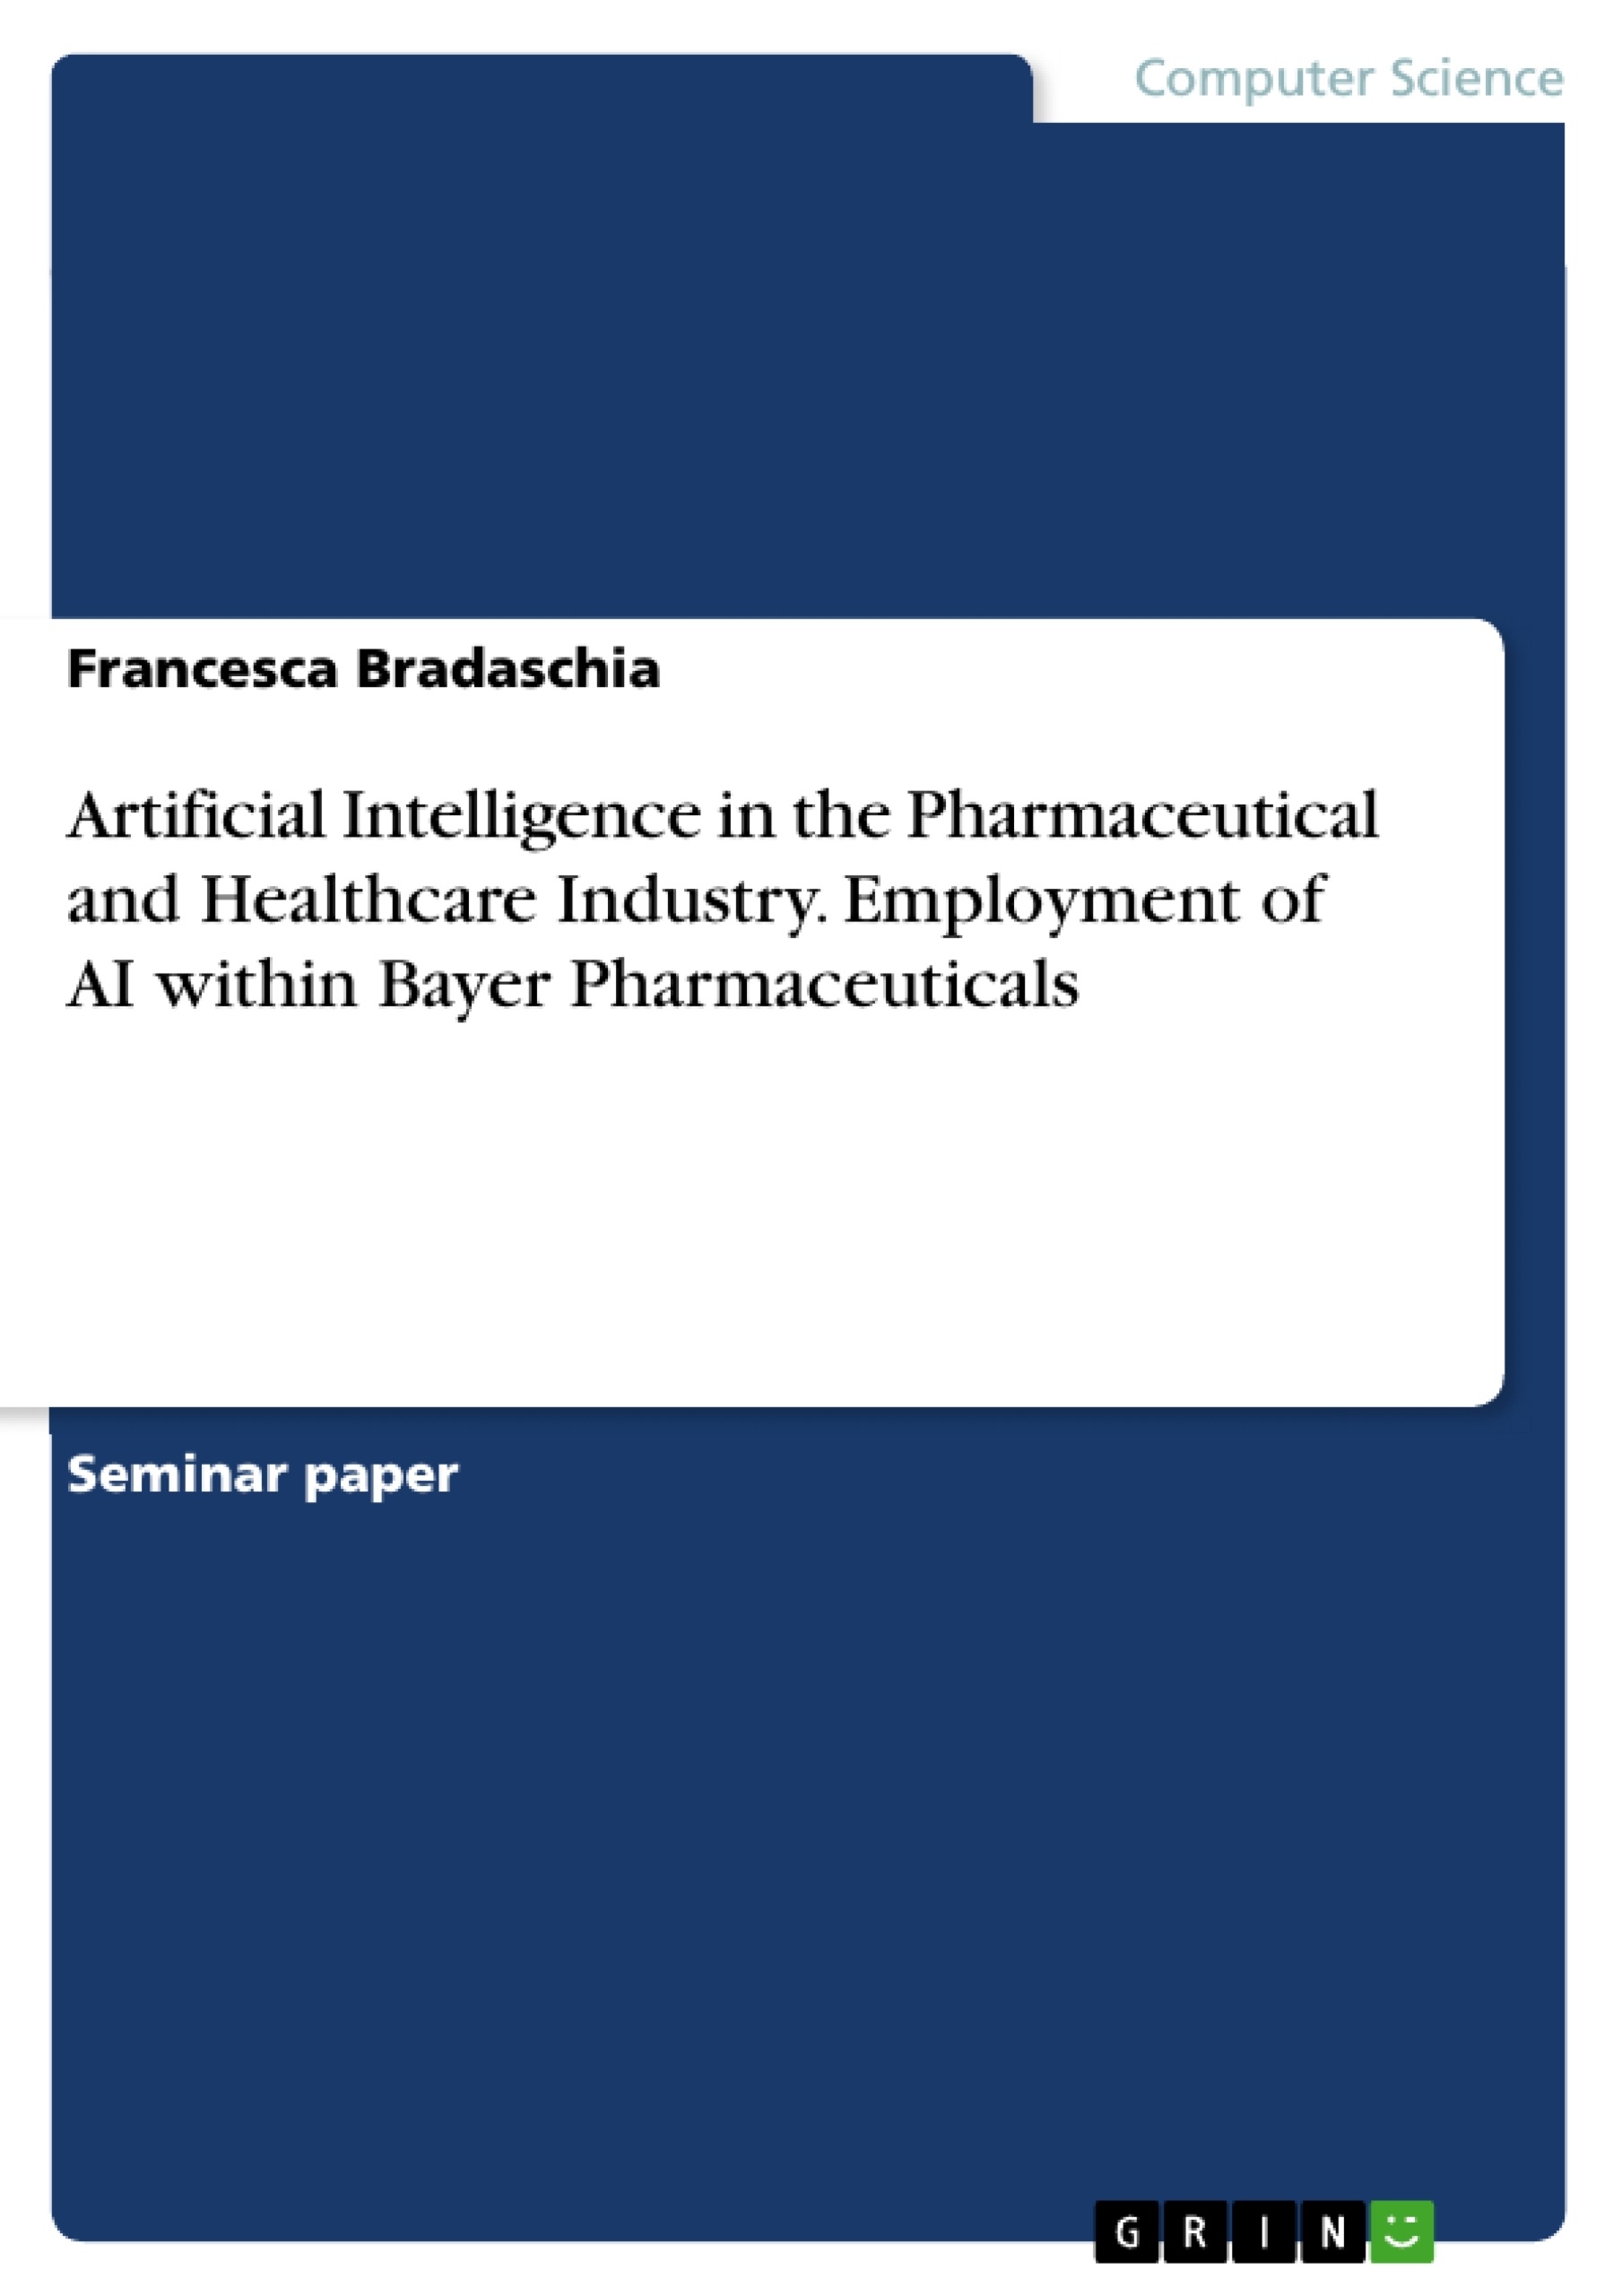 Title: Artificial Intelligence in the Pharmaceutical and Healthcare Industry. Employment of AI within Bayer Pharmaceuticals